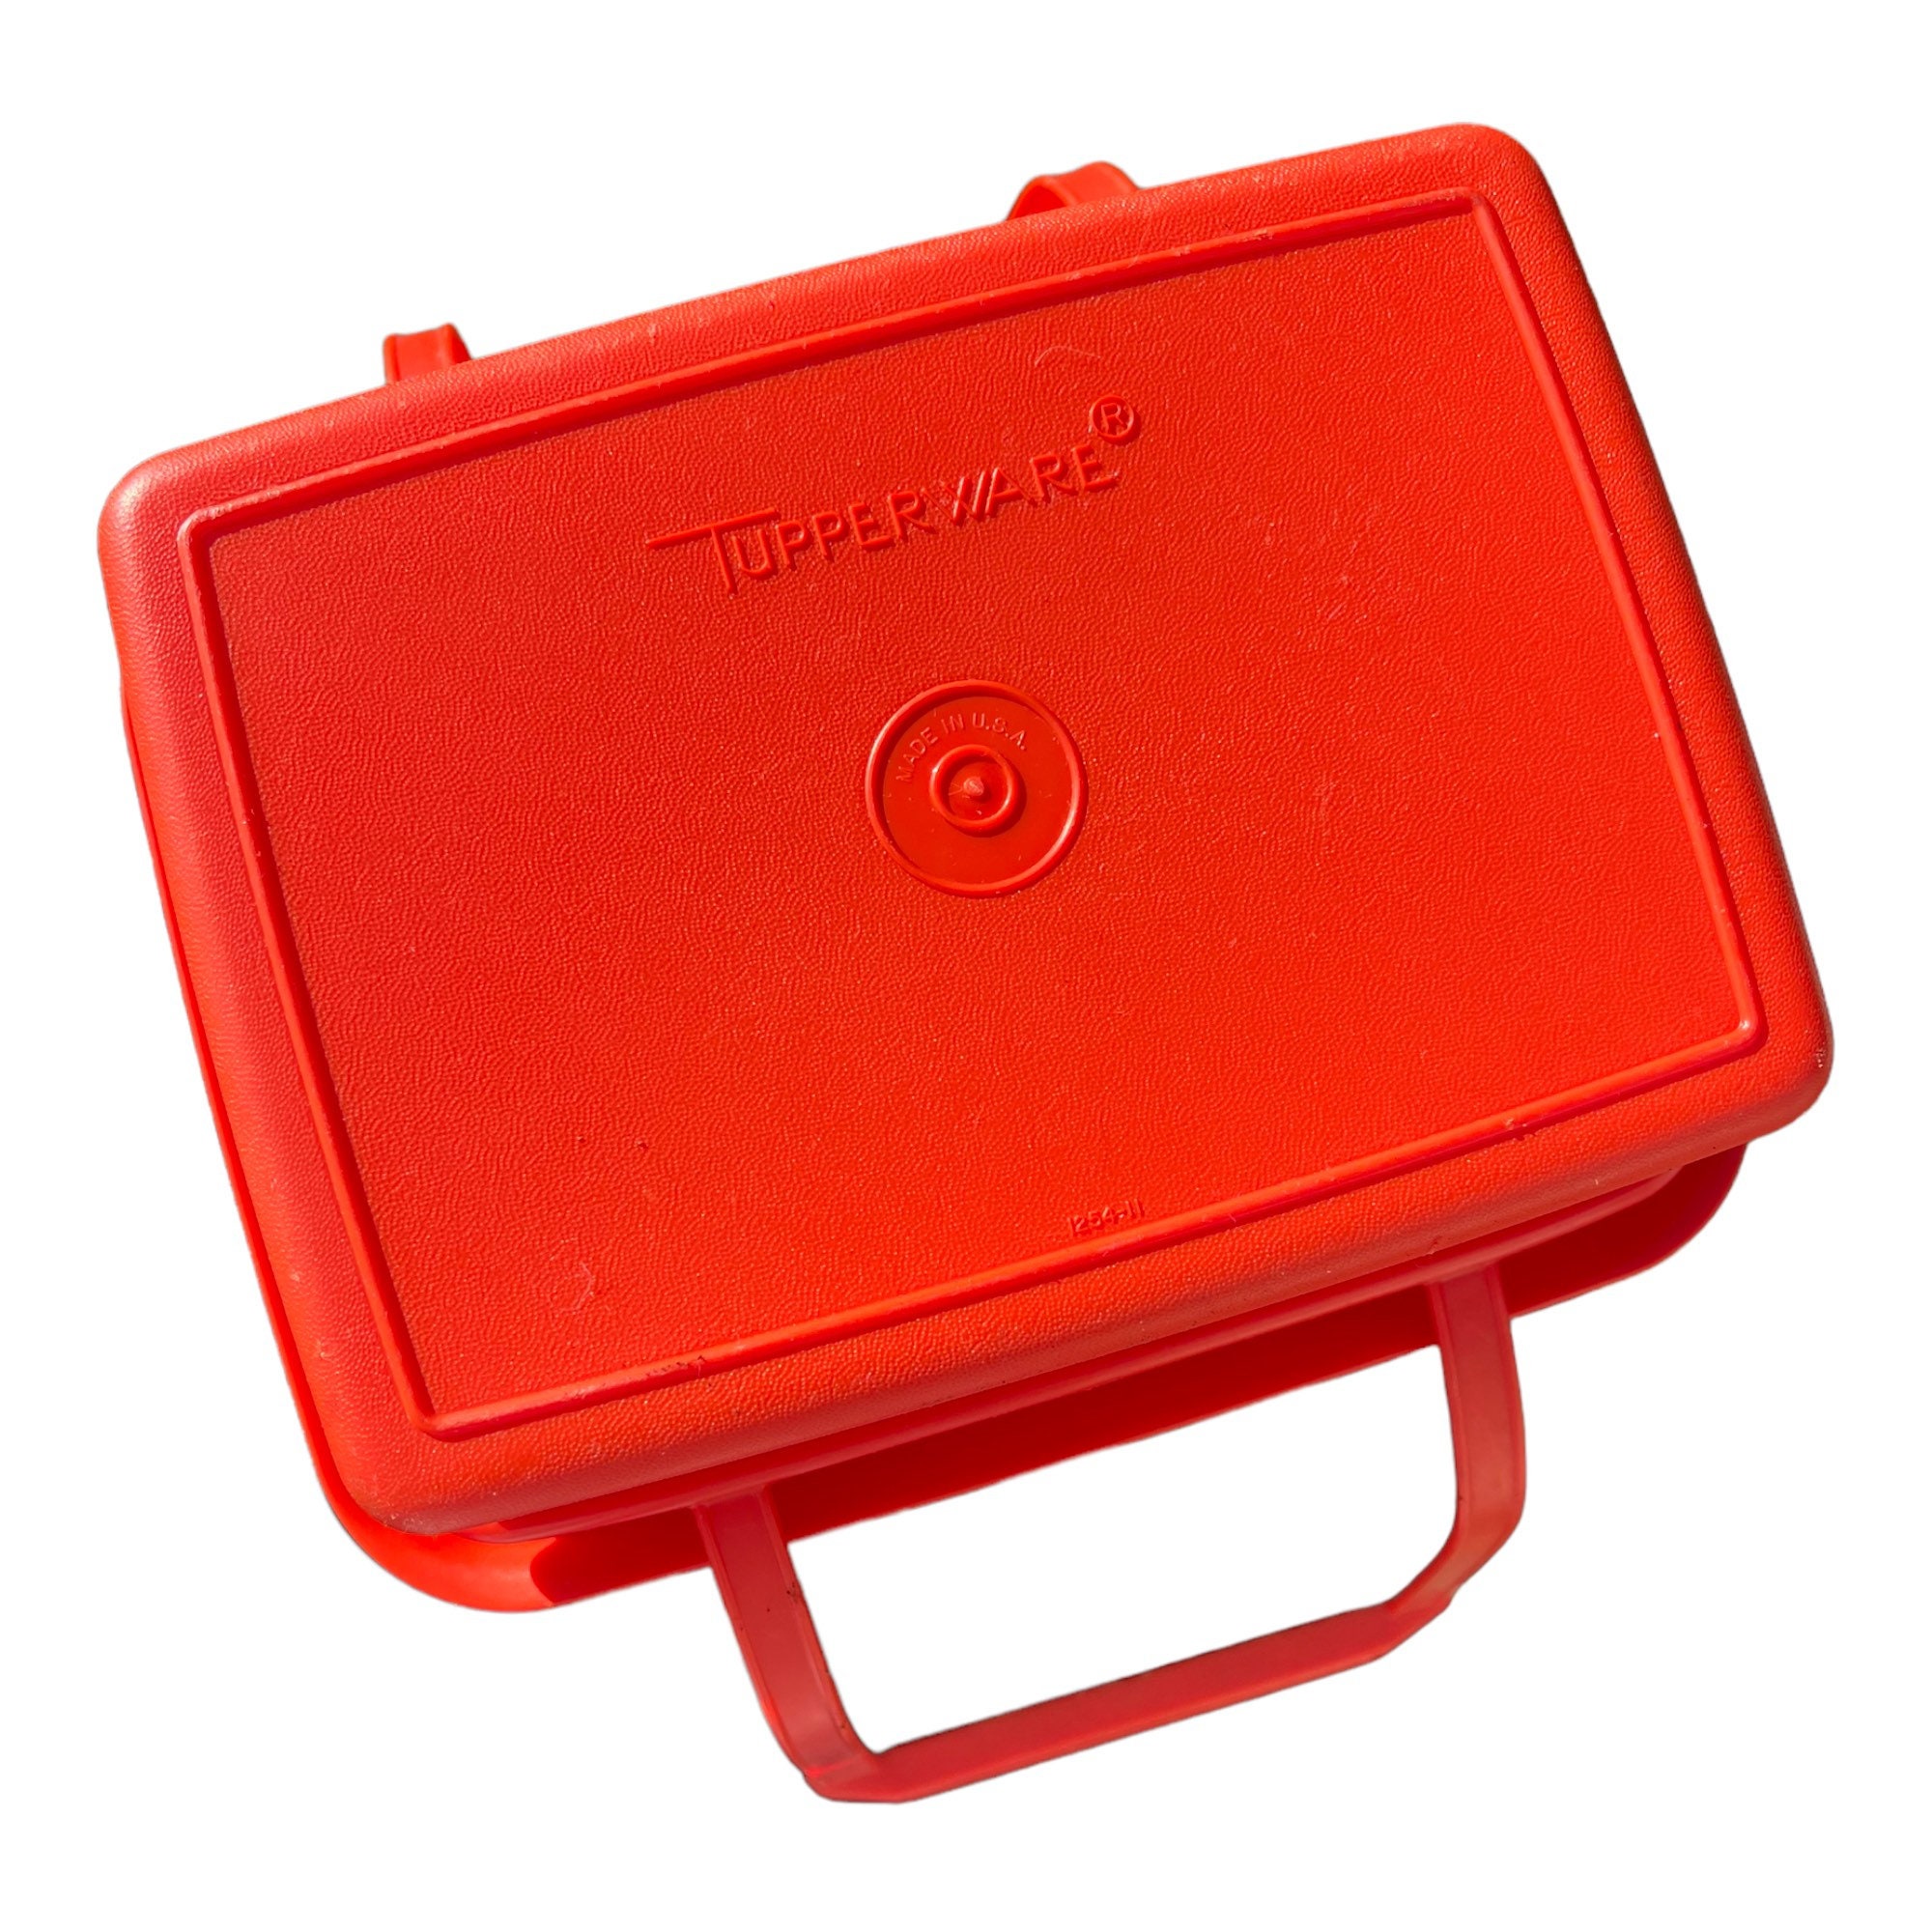 Vintage French Tupperware Bright Orange Lunch Box with Handle, Retro 1970s  Sandwich Holder for Child, Kids Meal Container from France